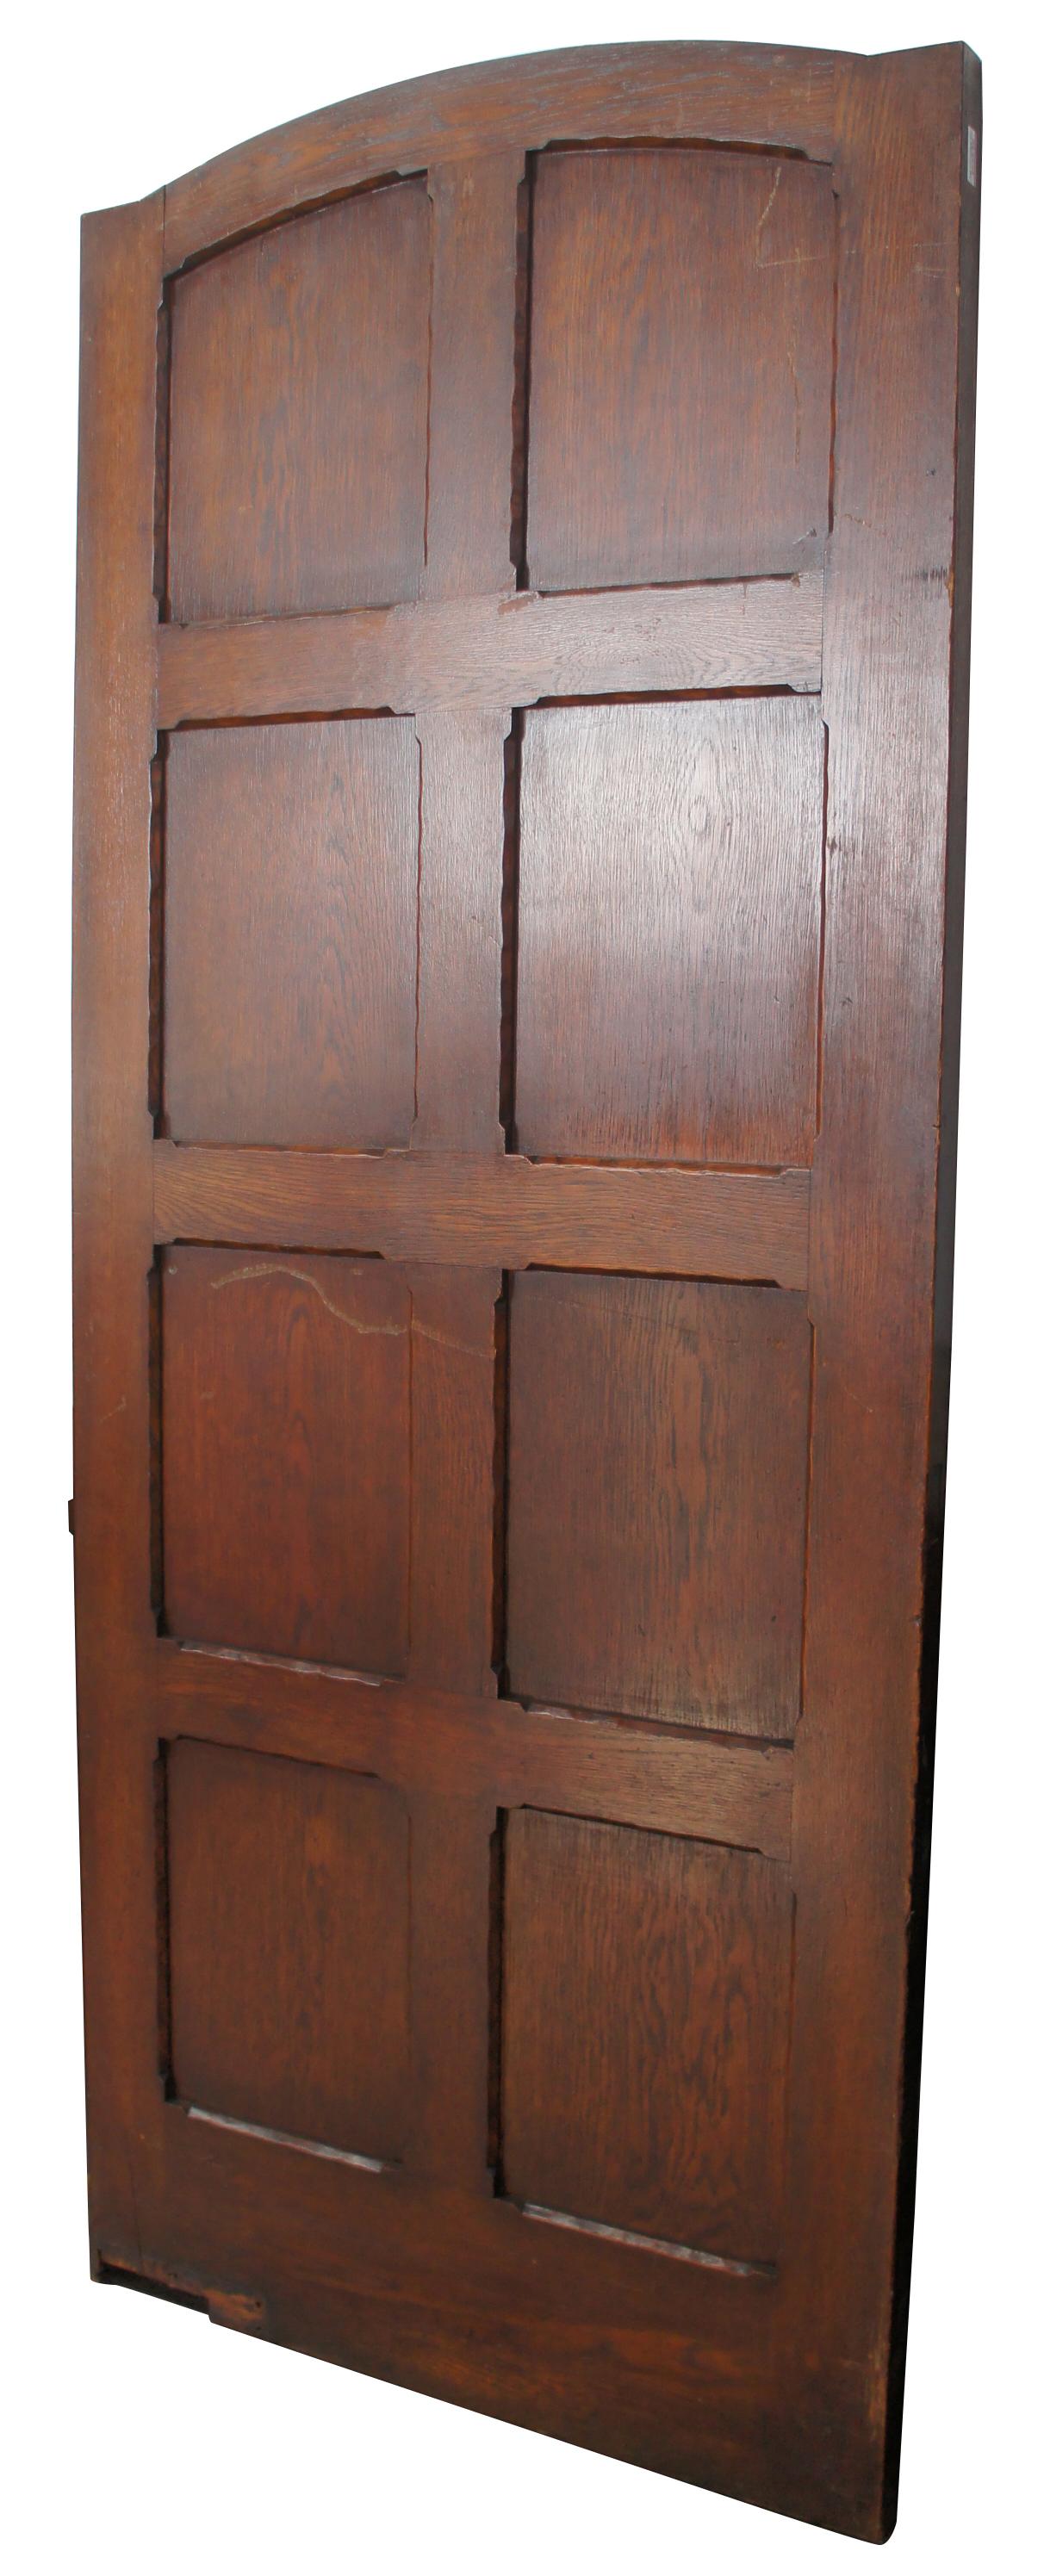 Spanish Colonial Antique Reclaimed Spanish Revival Solid Oak Arched Swinging Panel Door